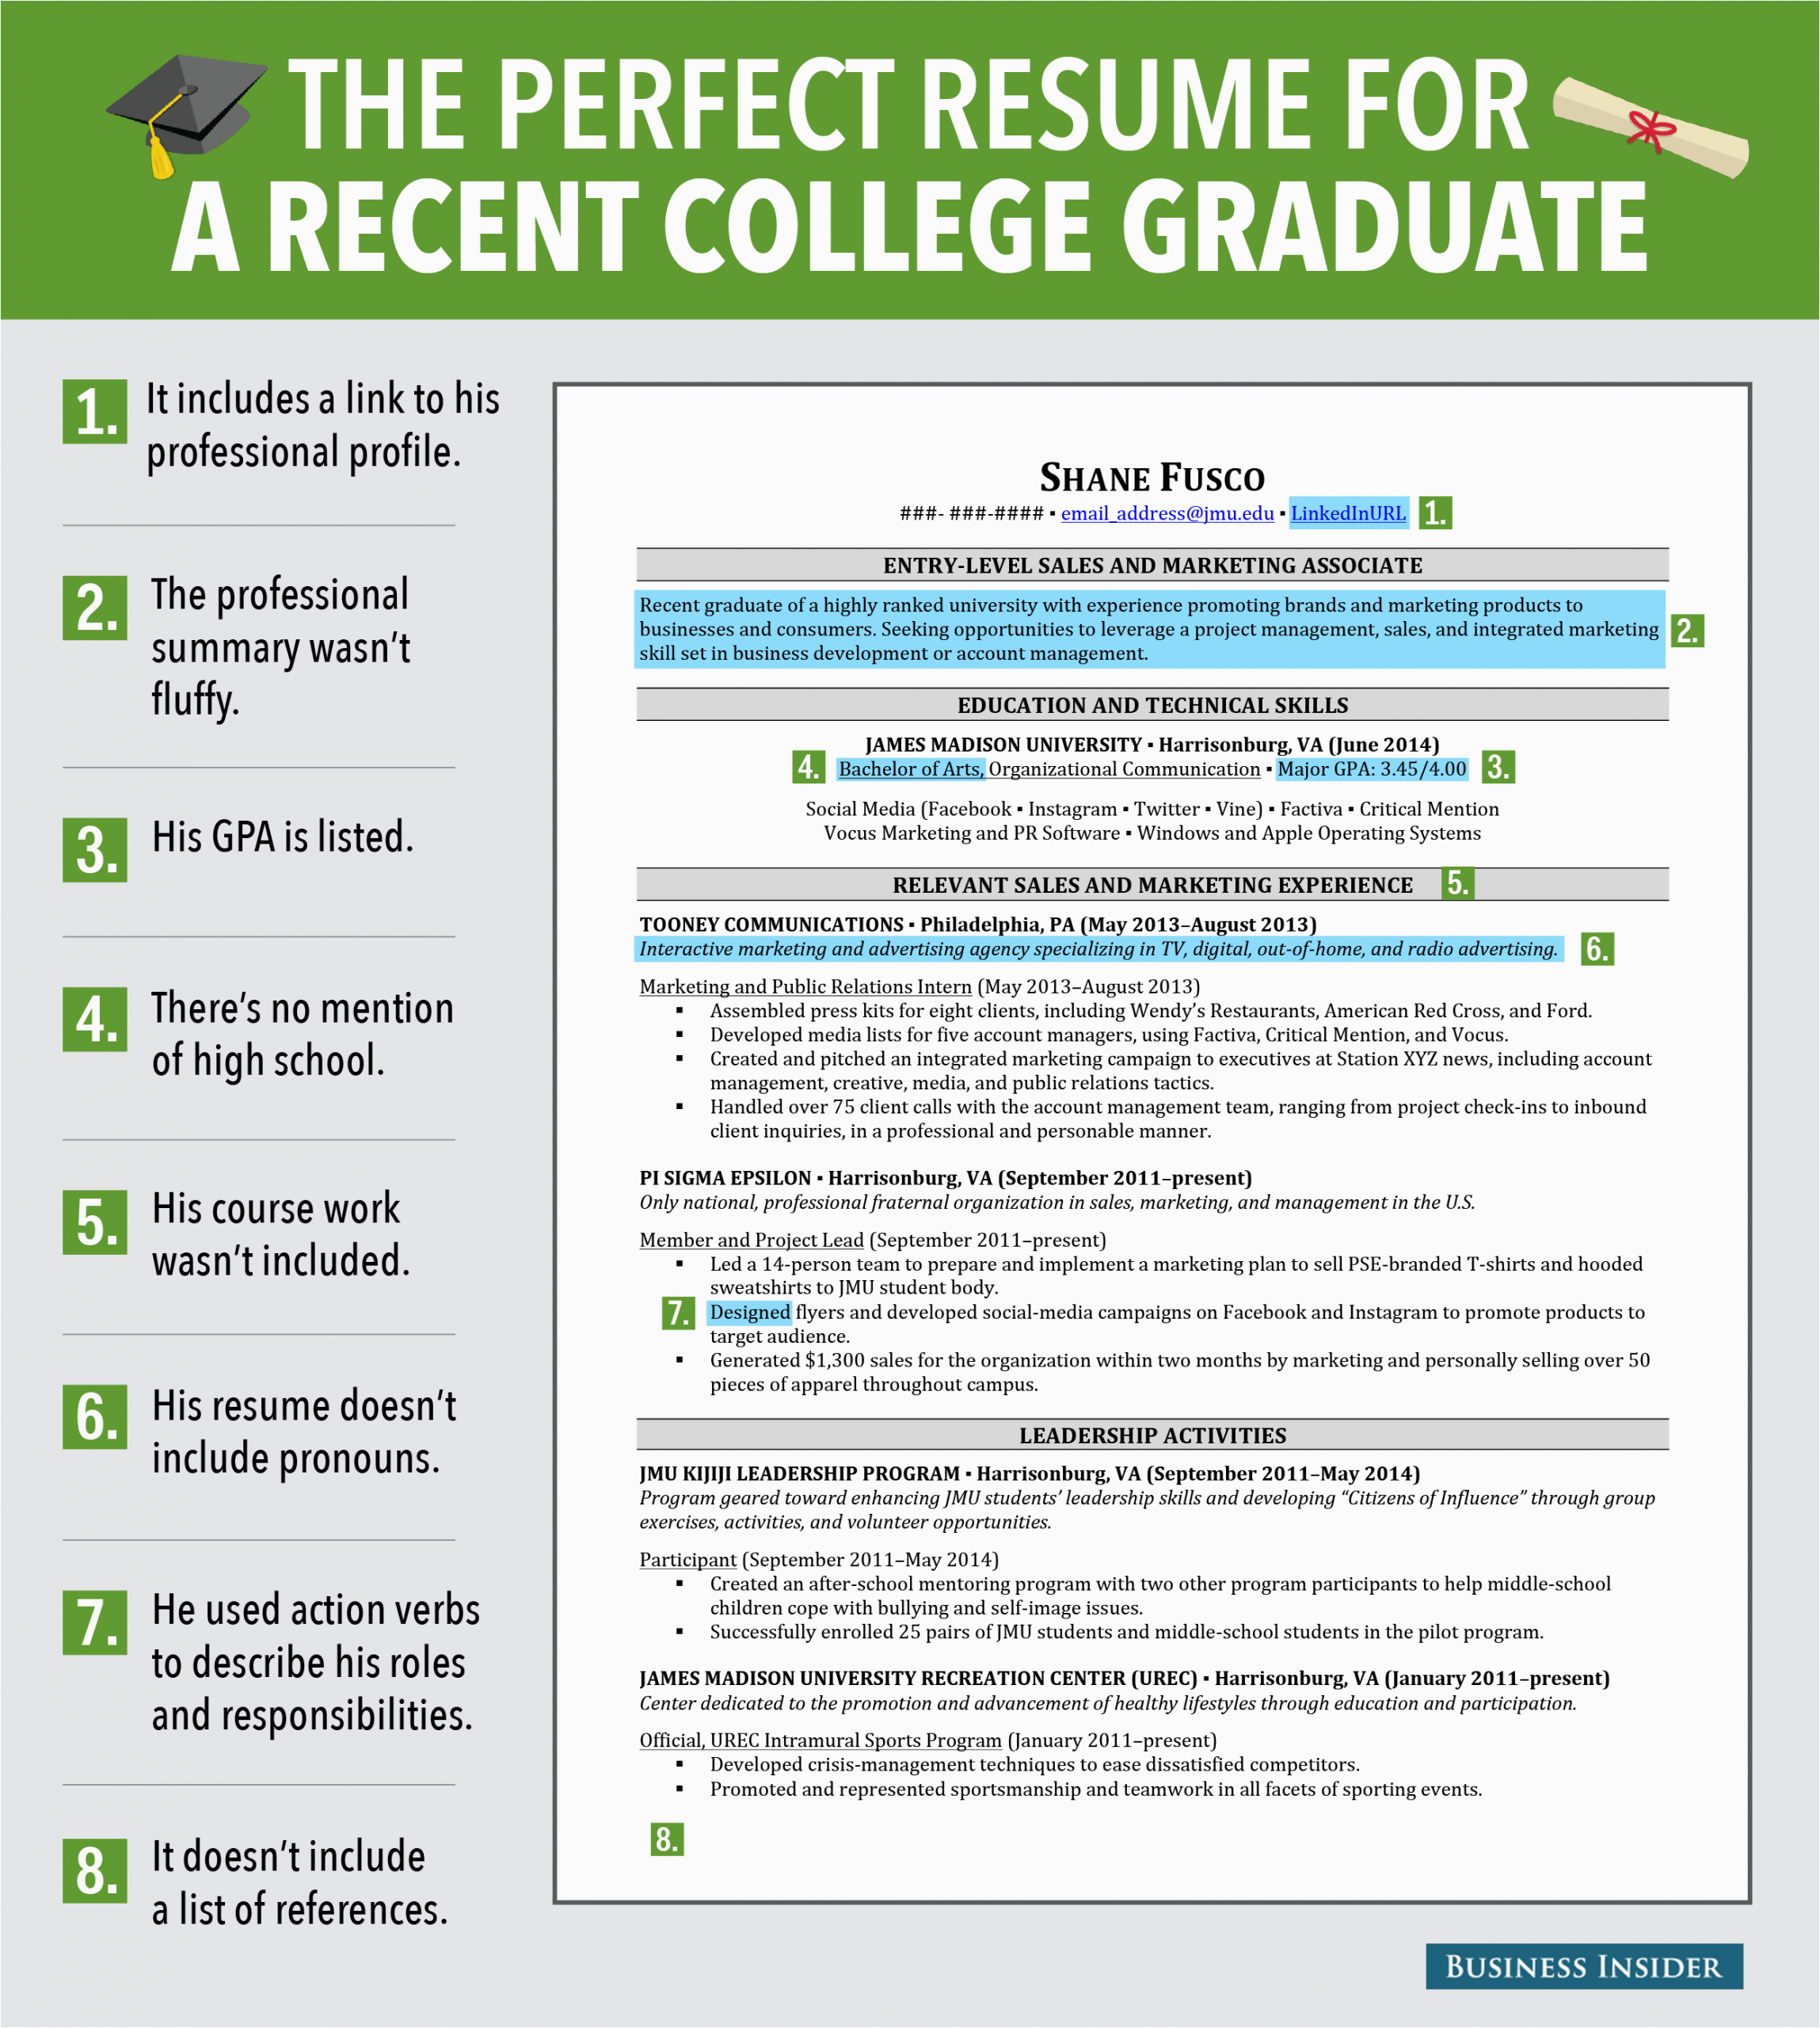 Free Resume Templates for Recent College Graduates 8 Reasons This is An Excellent Resume for A Recent College